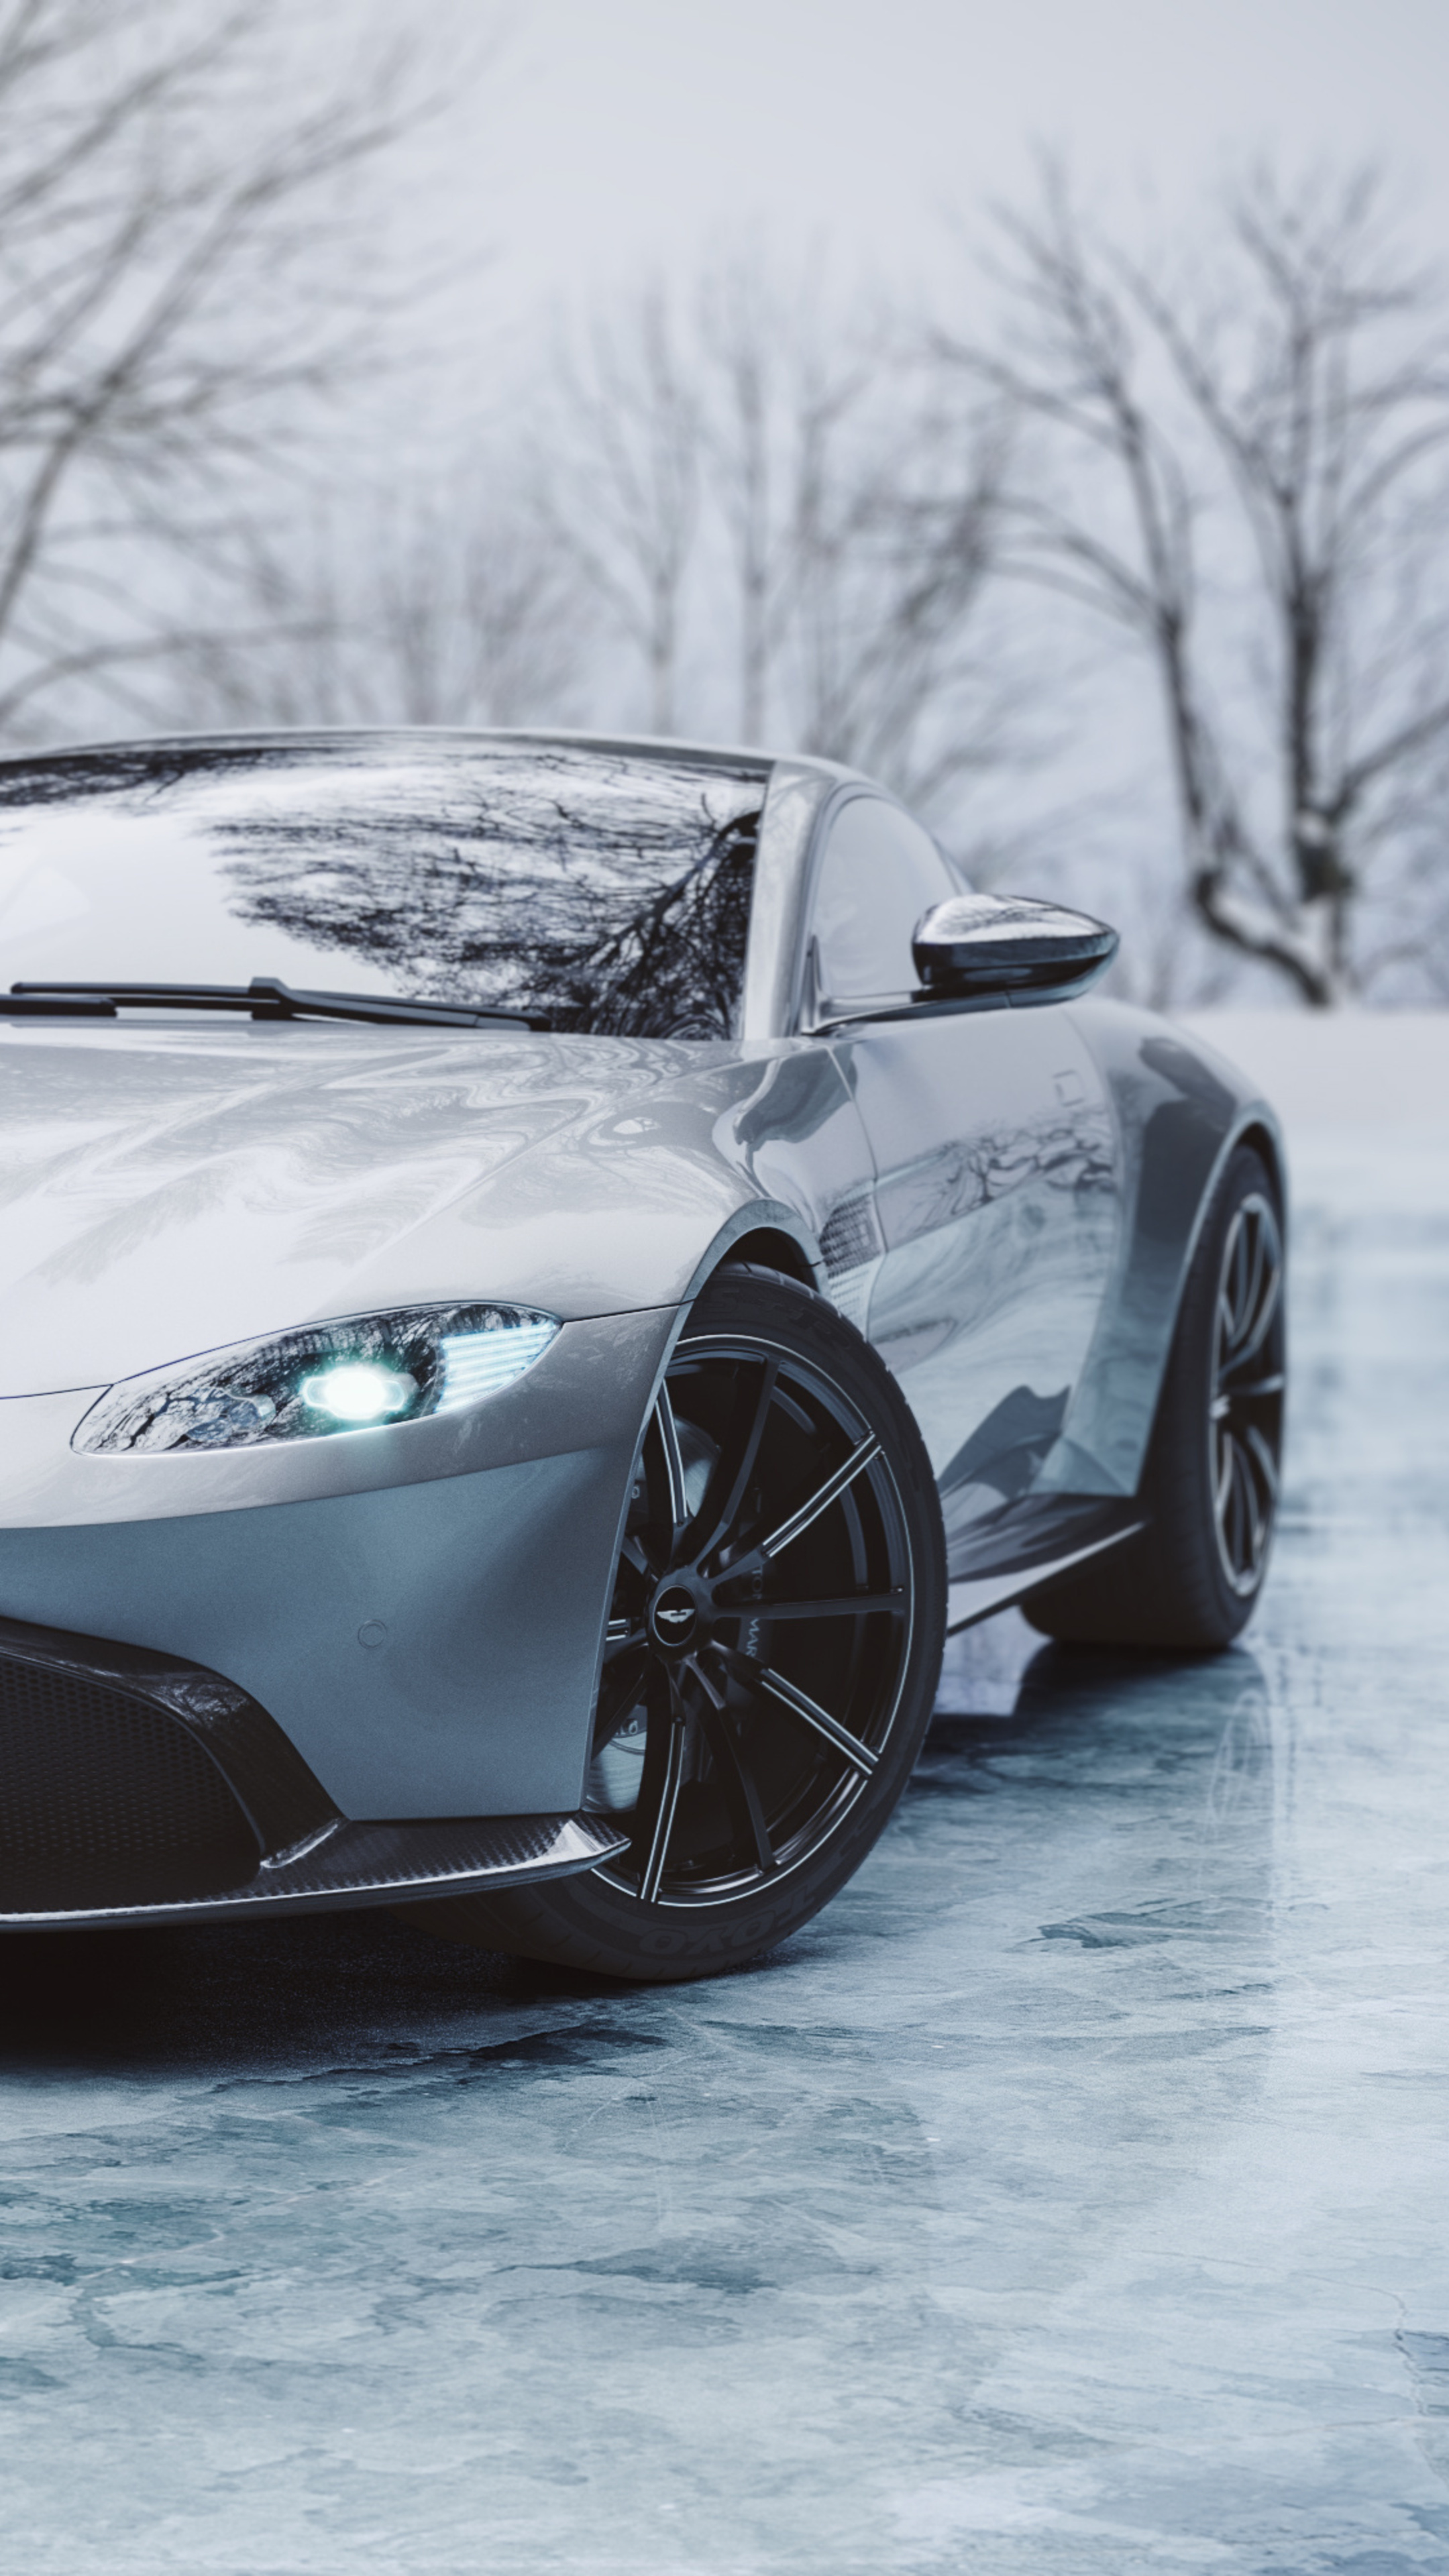 Aston Martin Vantage, Icy cold beauty, Xperia XZ wallpapers, Premium HD backgrounds, 2160x3840 4K Phone